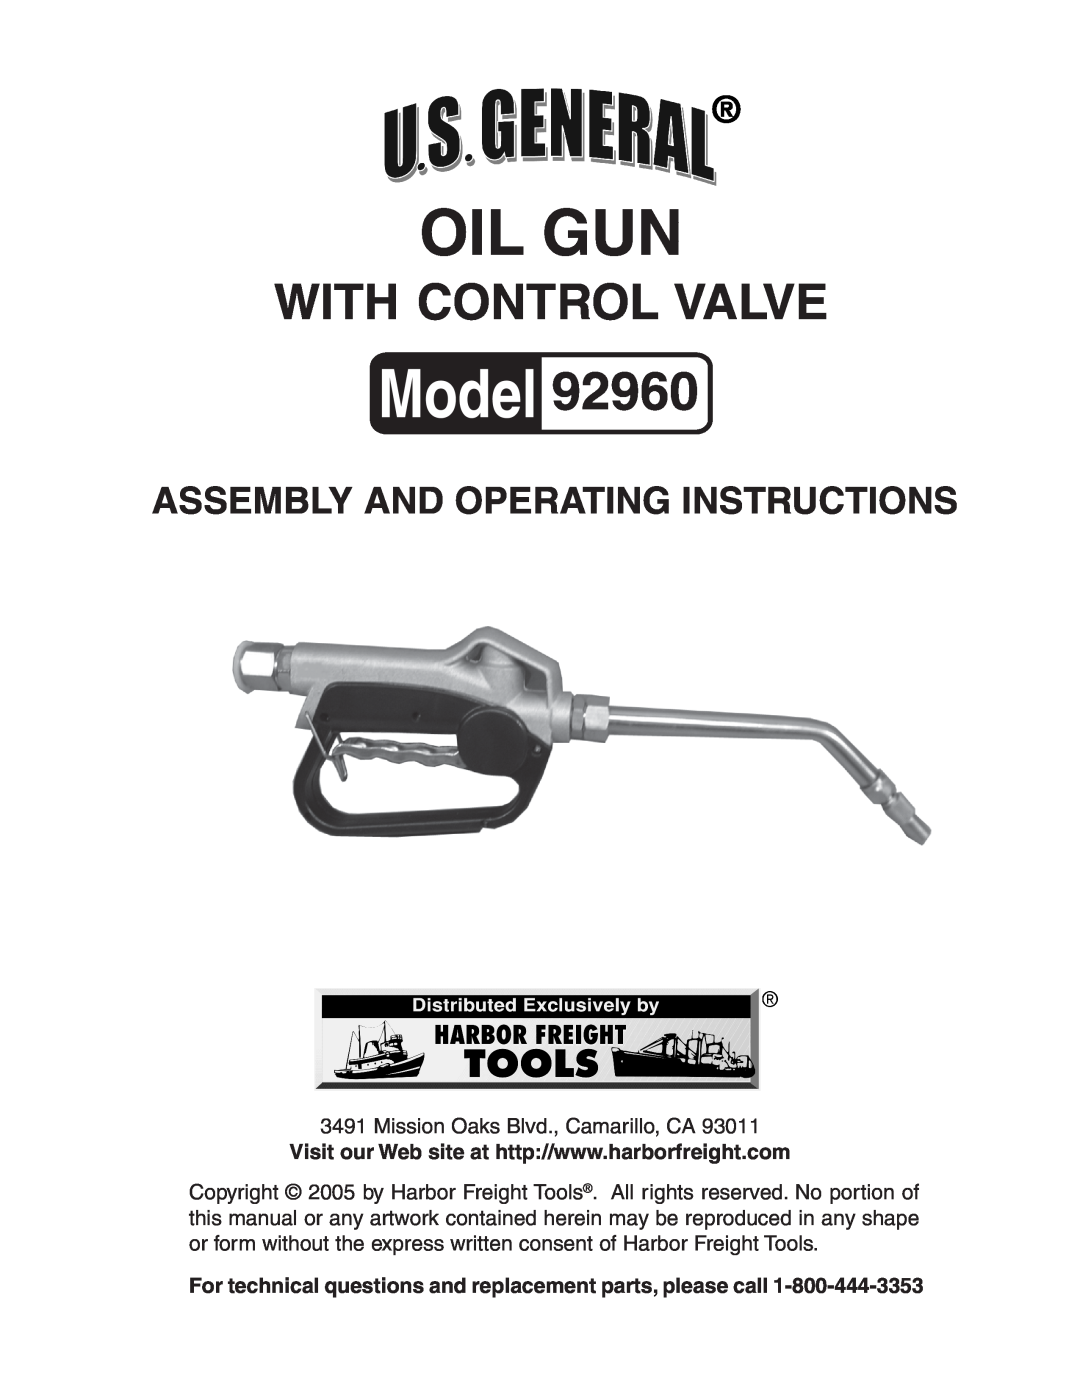 Harbor Freight Tools 92960 manual For technical questions and replacement parts, please call, Oil Gun, With Control Valve 